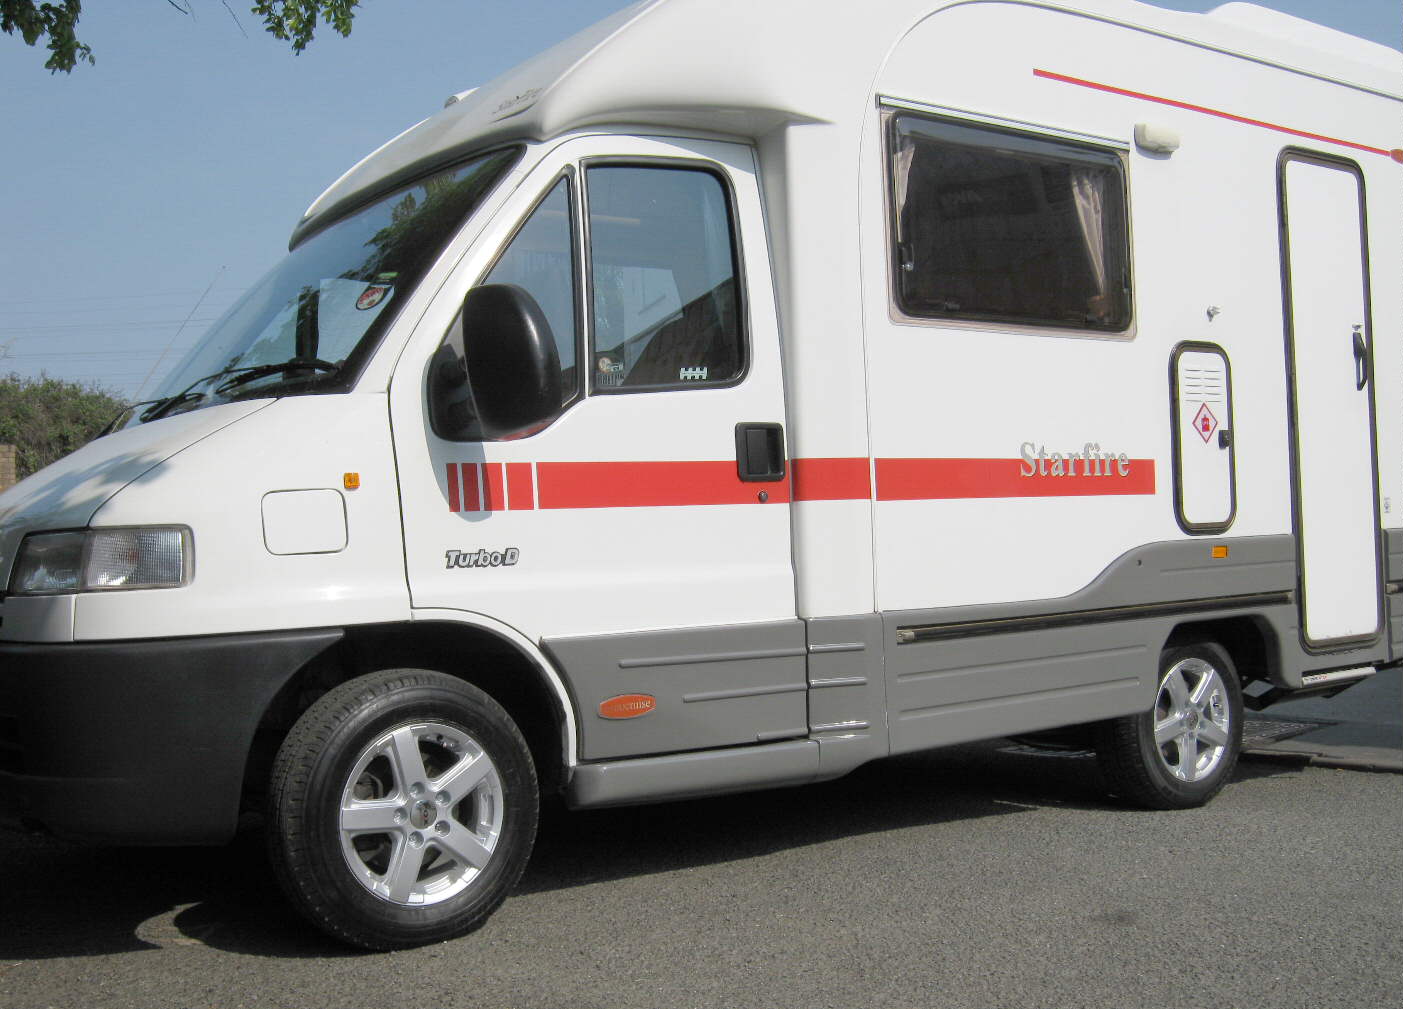 15" Fox Viper Alloys and 195/70R15 tyres on Fiat Ducato Motorhome